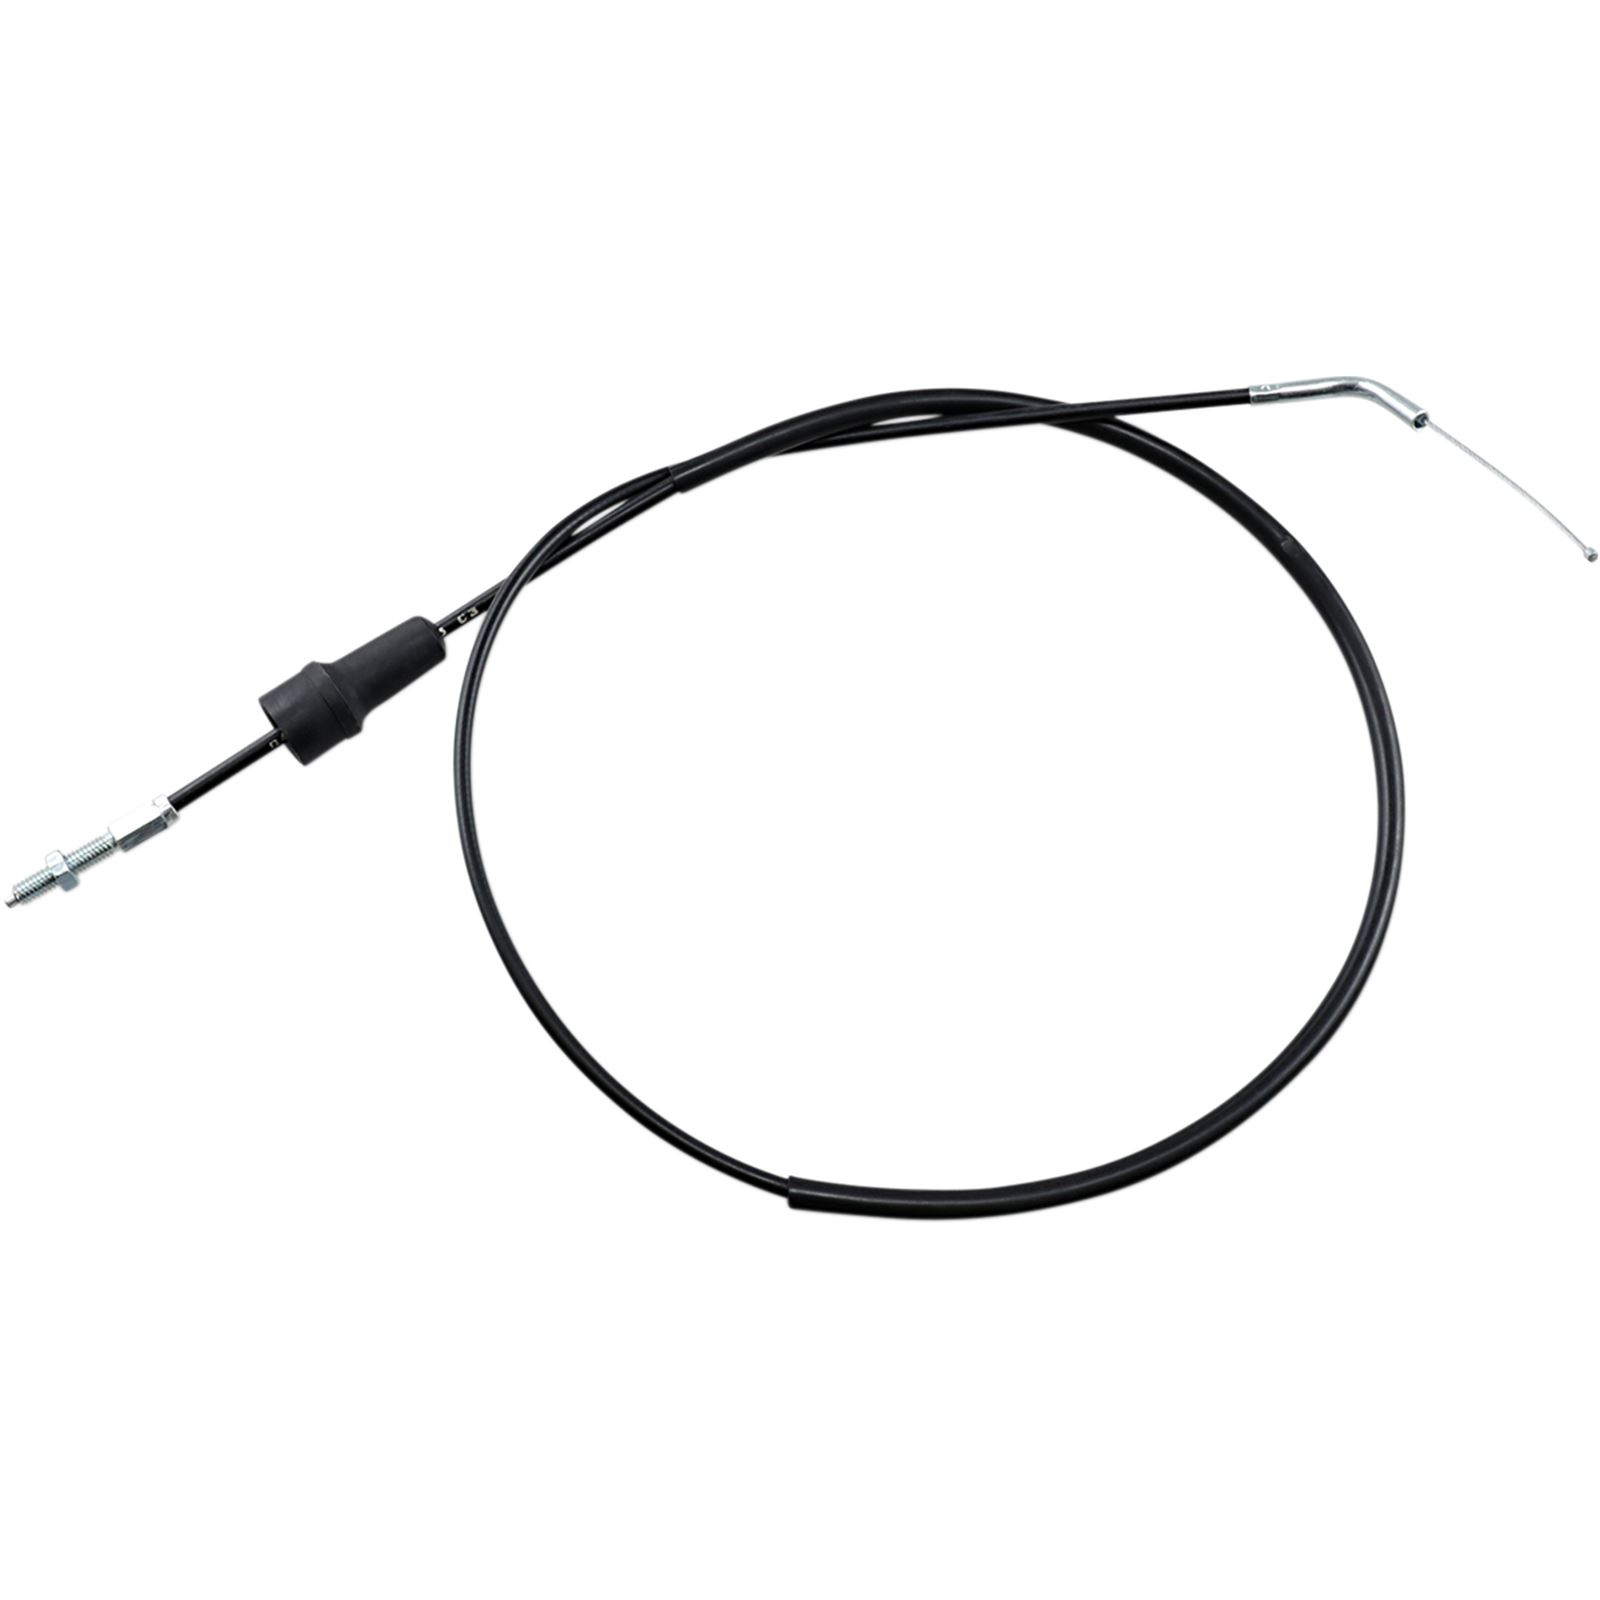 NEW MOTION PRO 10-0096 Replacement Control Cables For ATV/UTV